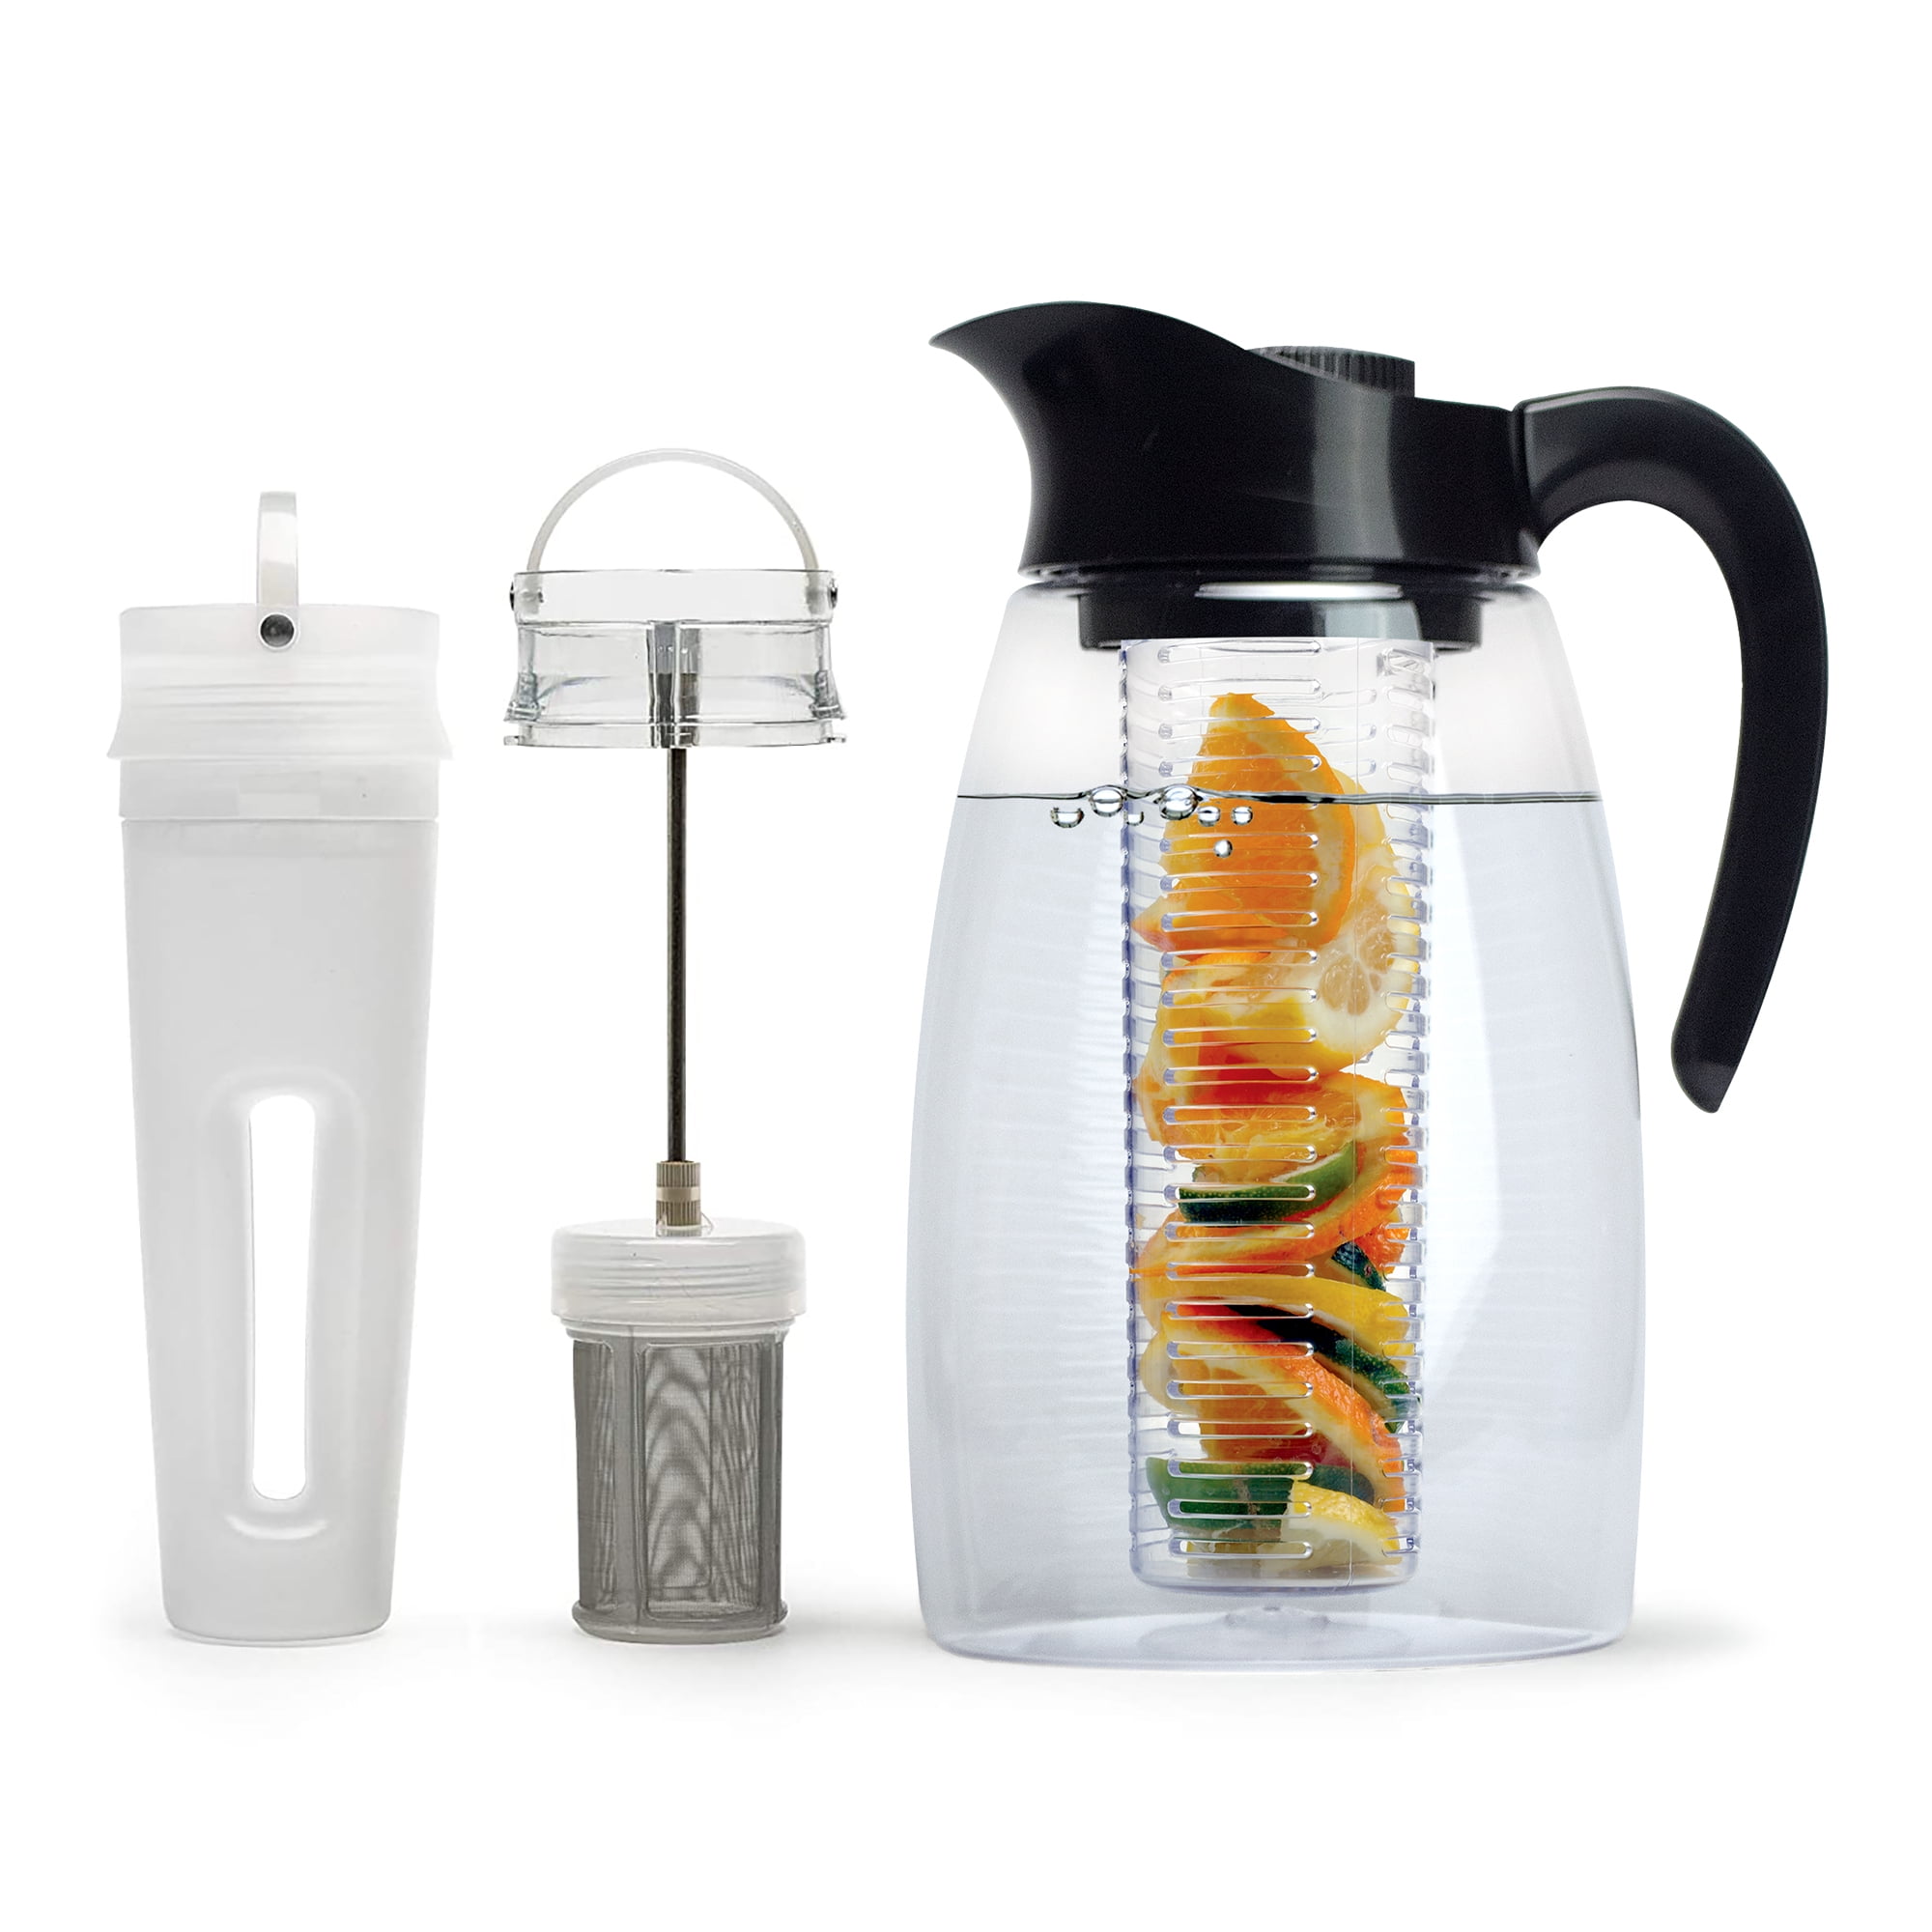 Built 2.7-liter Tritan Infuser Pitcher with Handle and Teal Lid